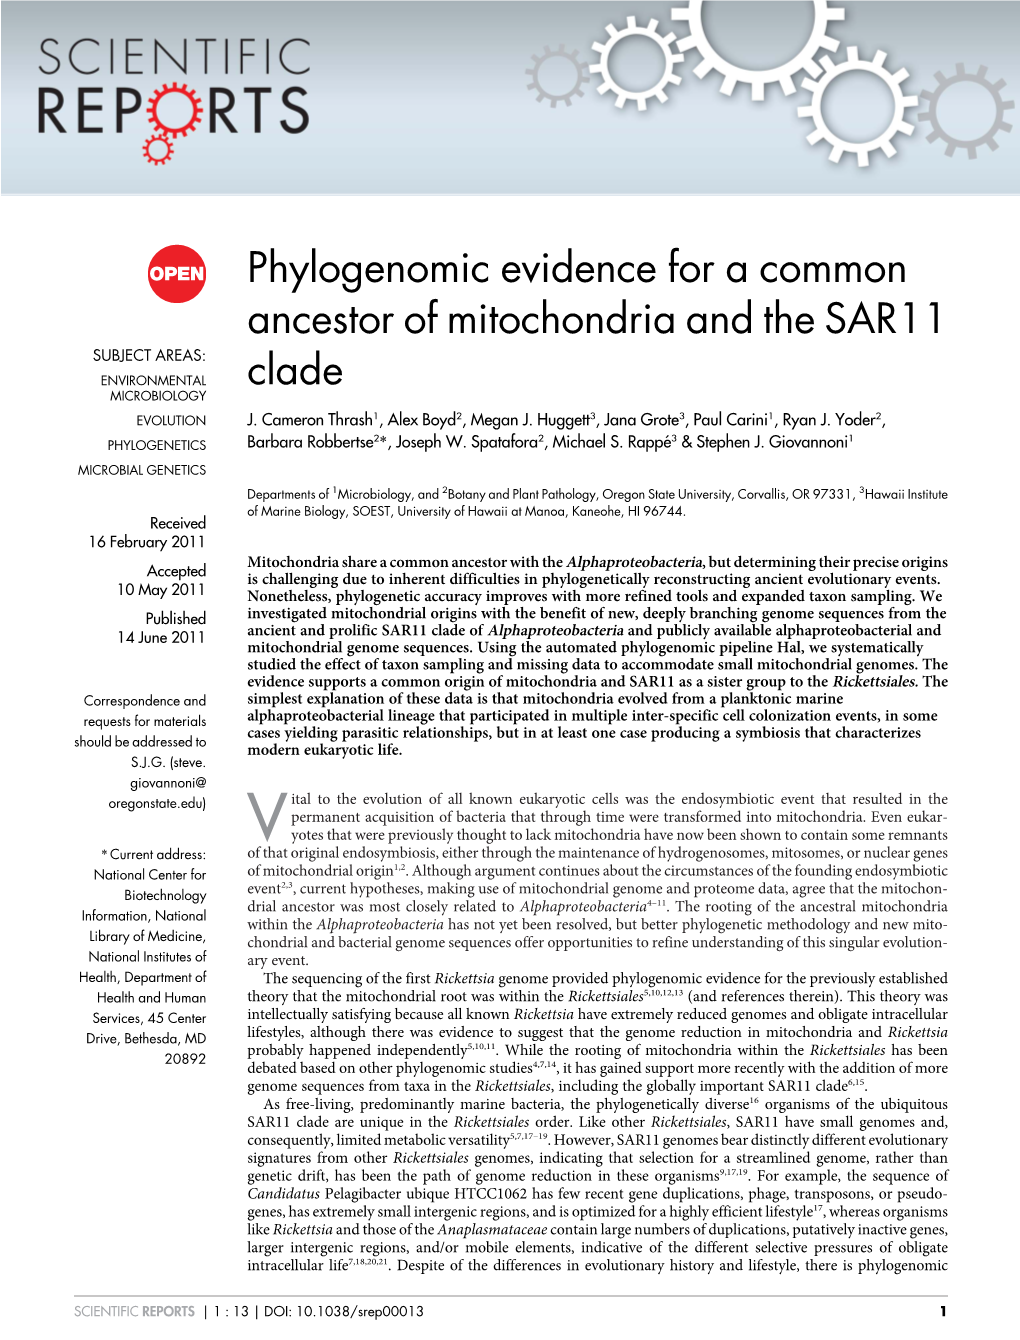 Phylogenomic Evidence for a Common Ancestor of Mitochondria and the SAR11 SUBJECT AREAS: ENVIRONMENTAL Clade MICROBIOLOGY EVOLUTION J